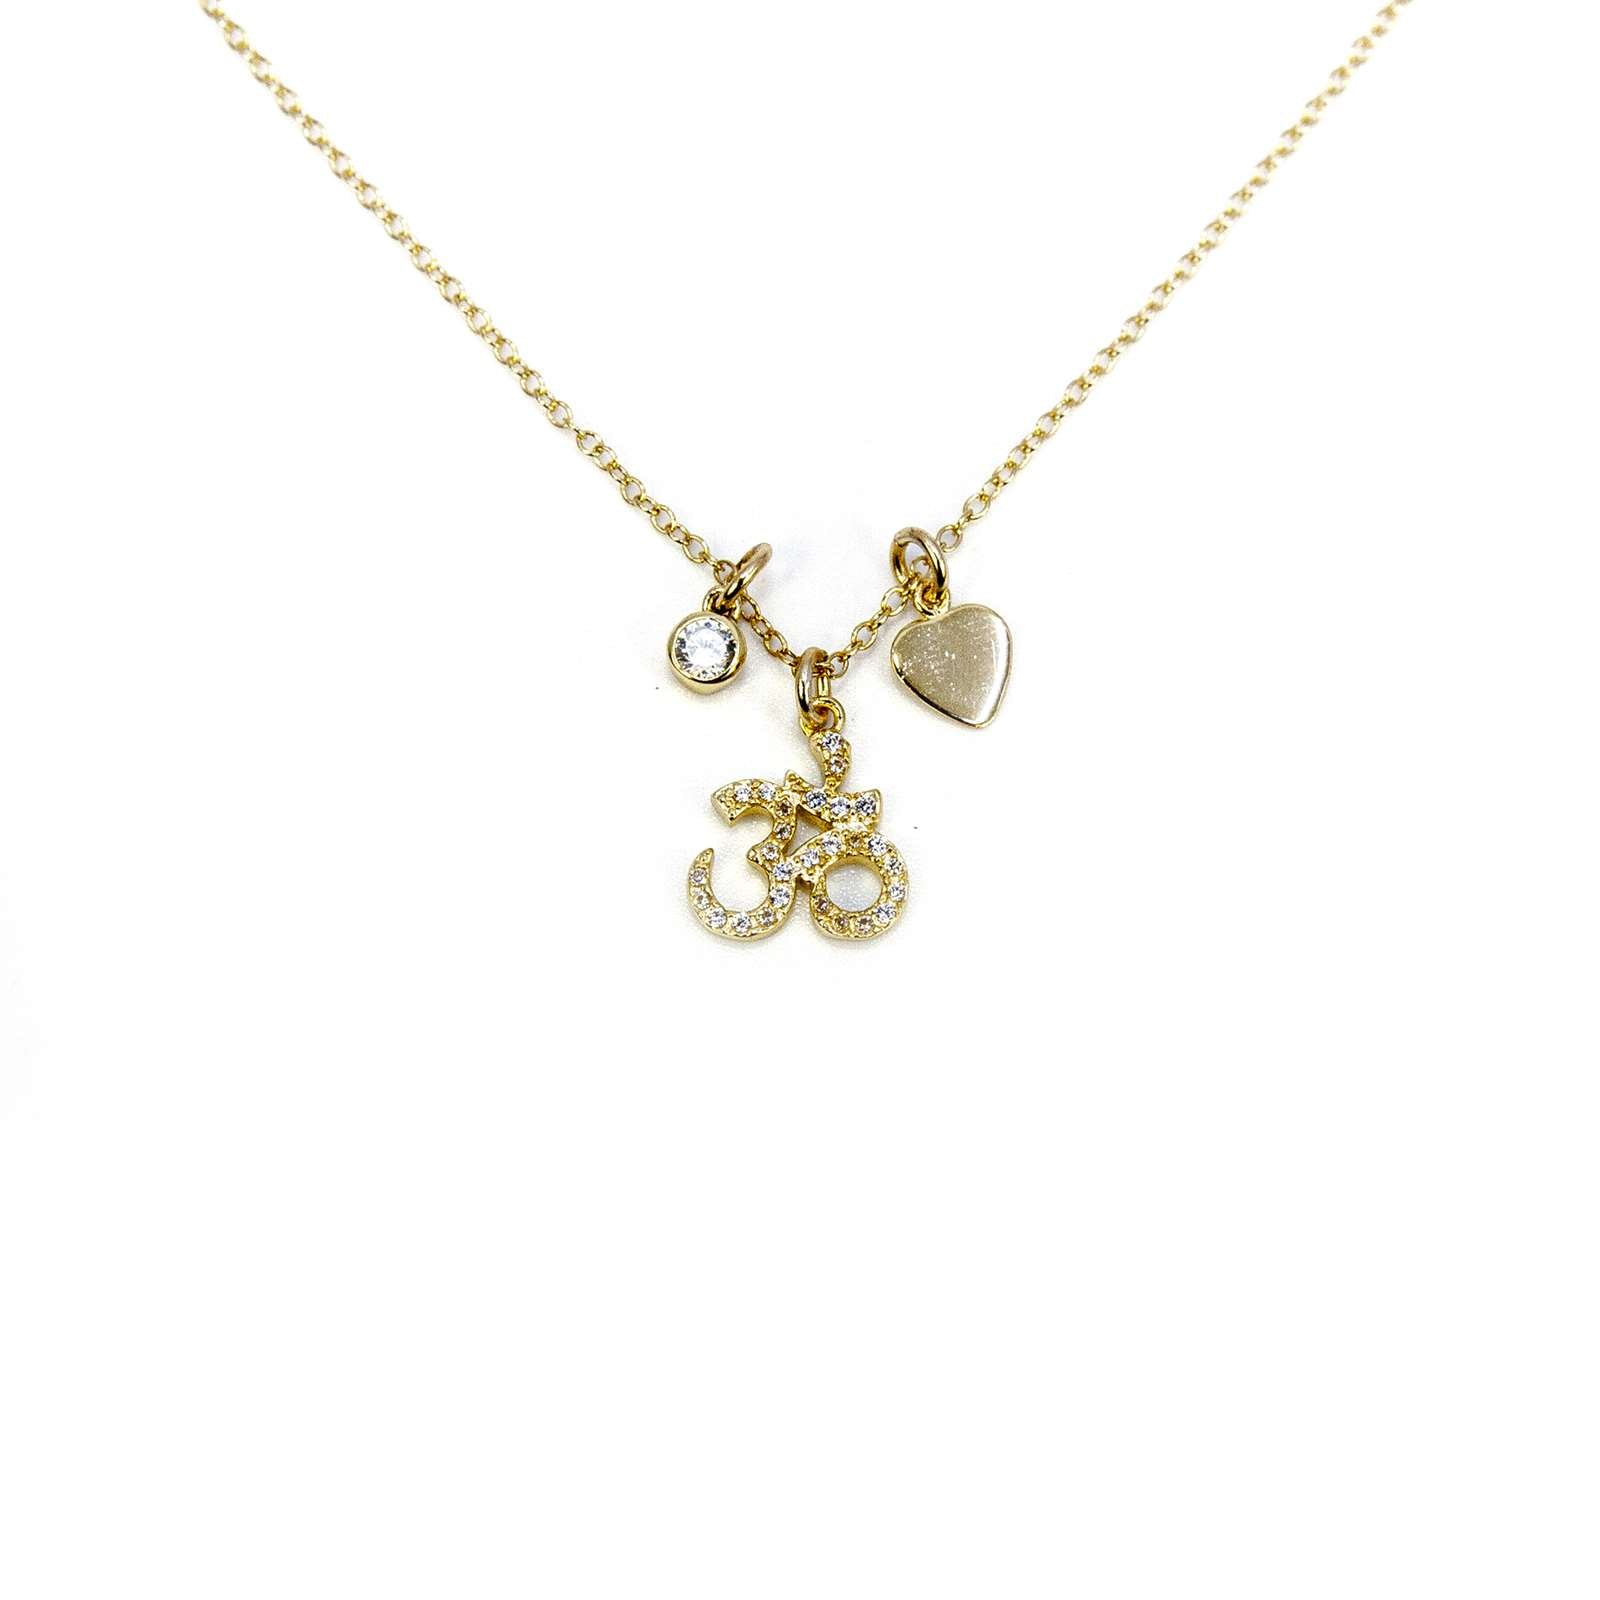 Athra Women Om Charm Necklace With Extension